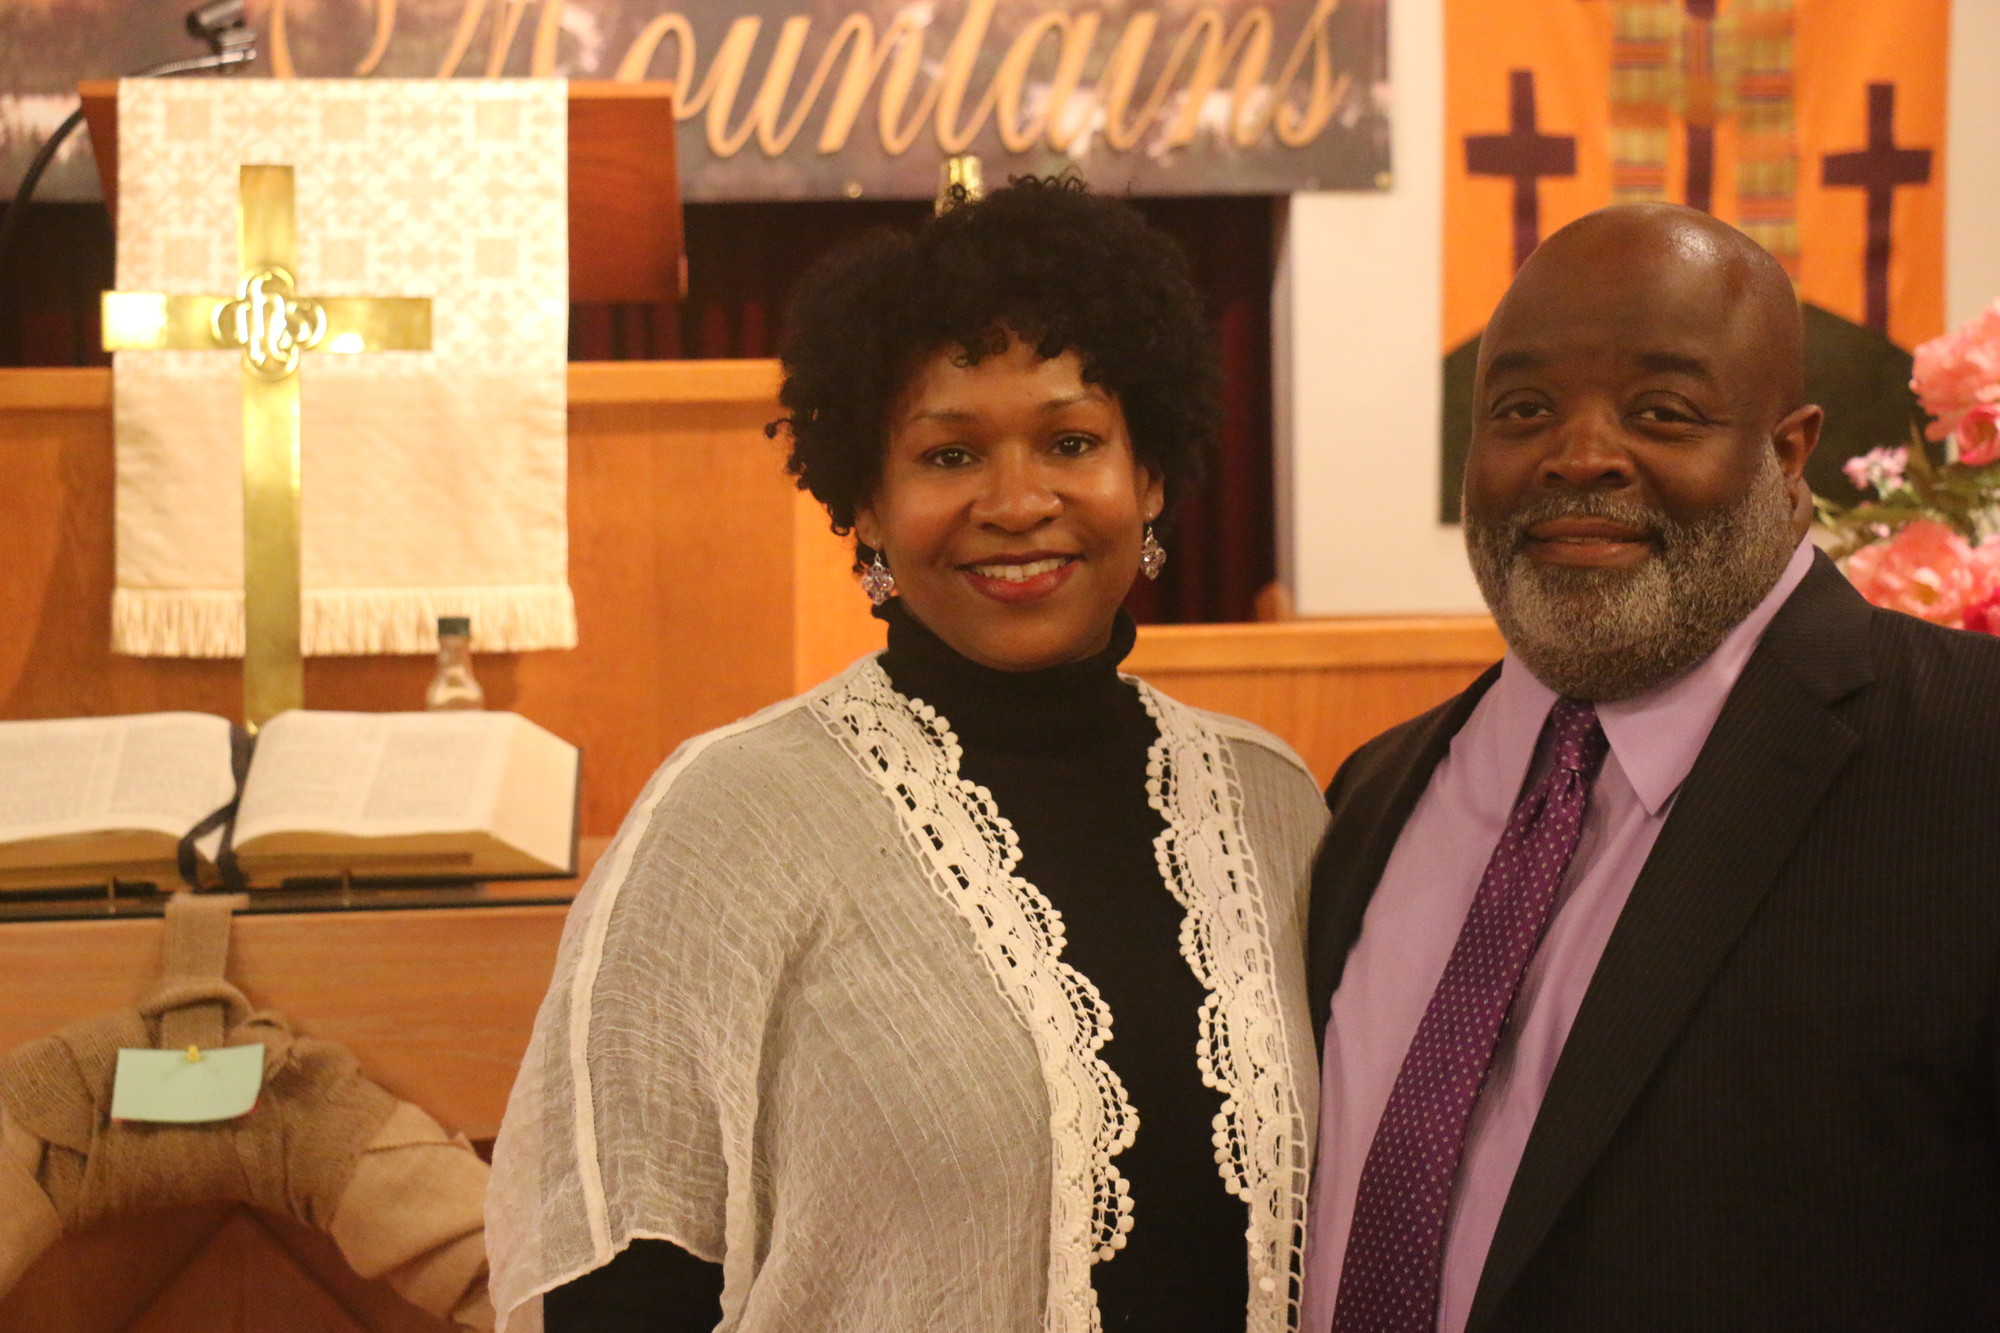 The Rev. Kymberley Clemons-Jones and her husband, Phil Jones, of Valley Stream Presbyterian Church, hope to make the carnival an annual event. It will serve as a fundraiser for the church.